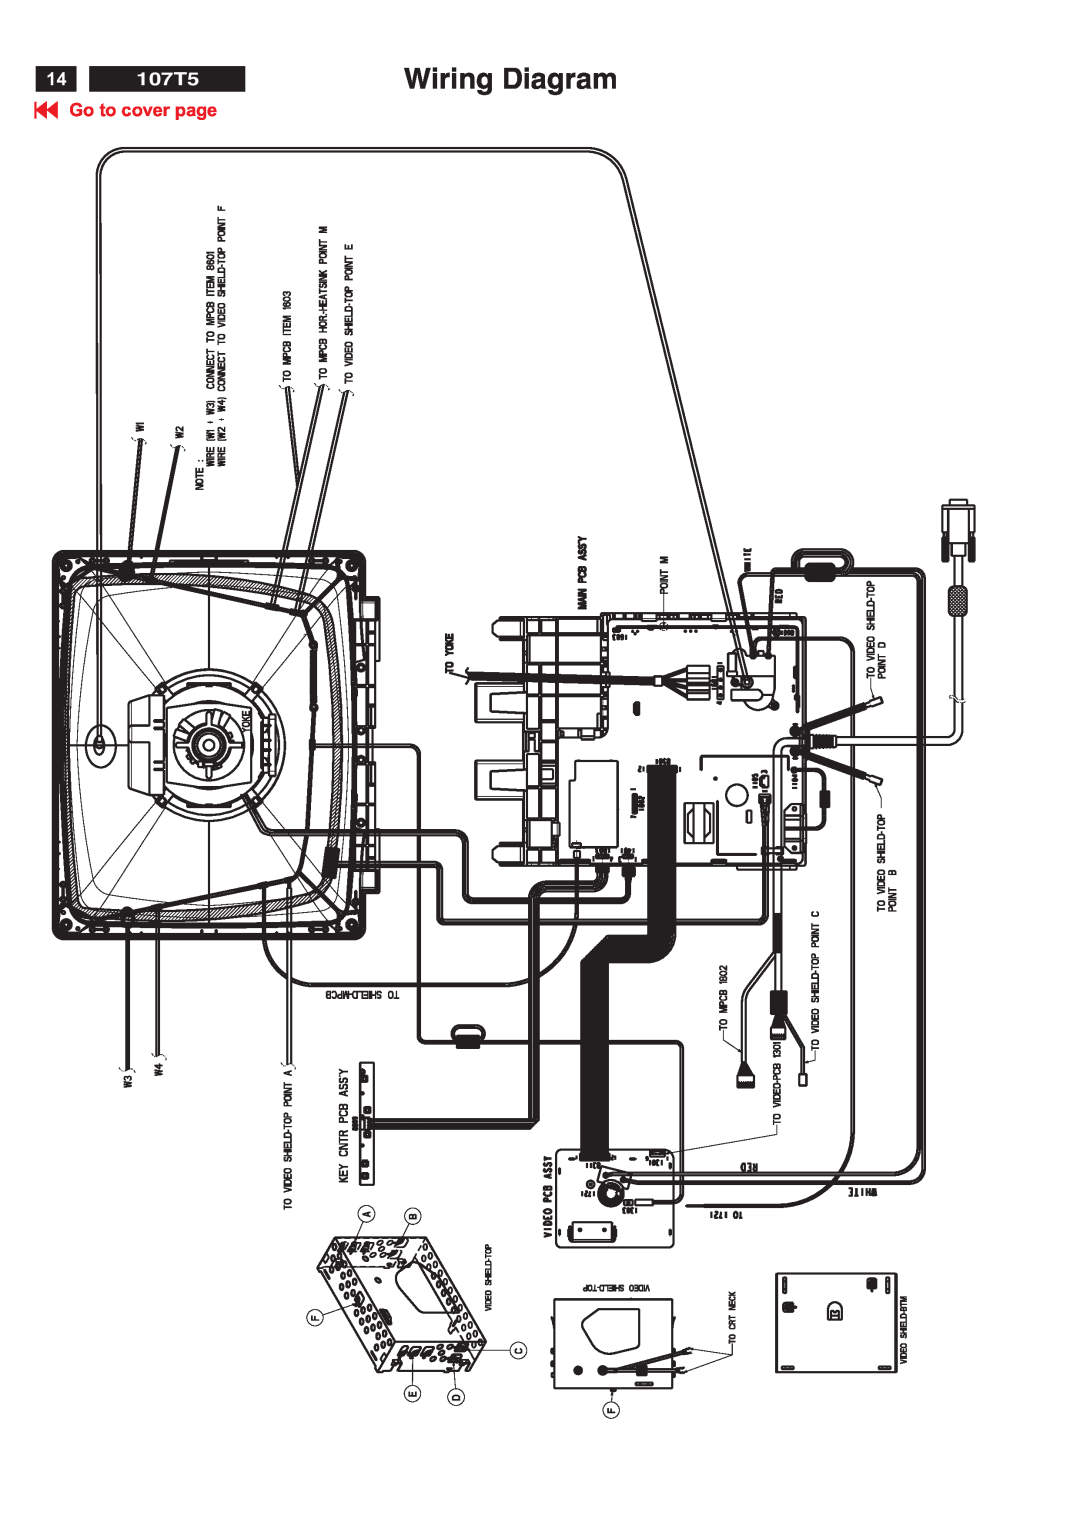 Philips V30 manual Wiring Diagram, 107T5, Go to cover page 